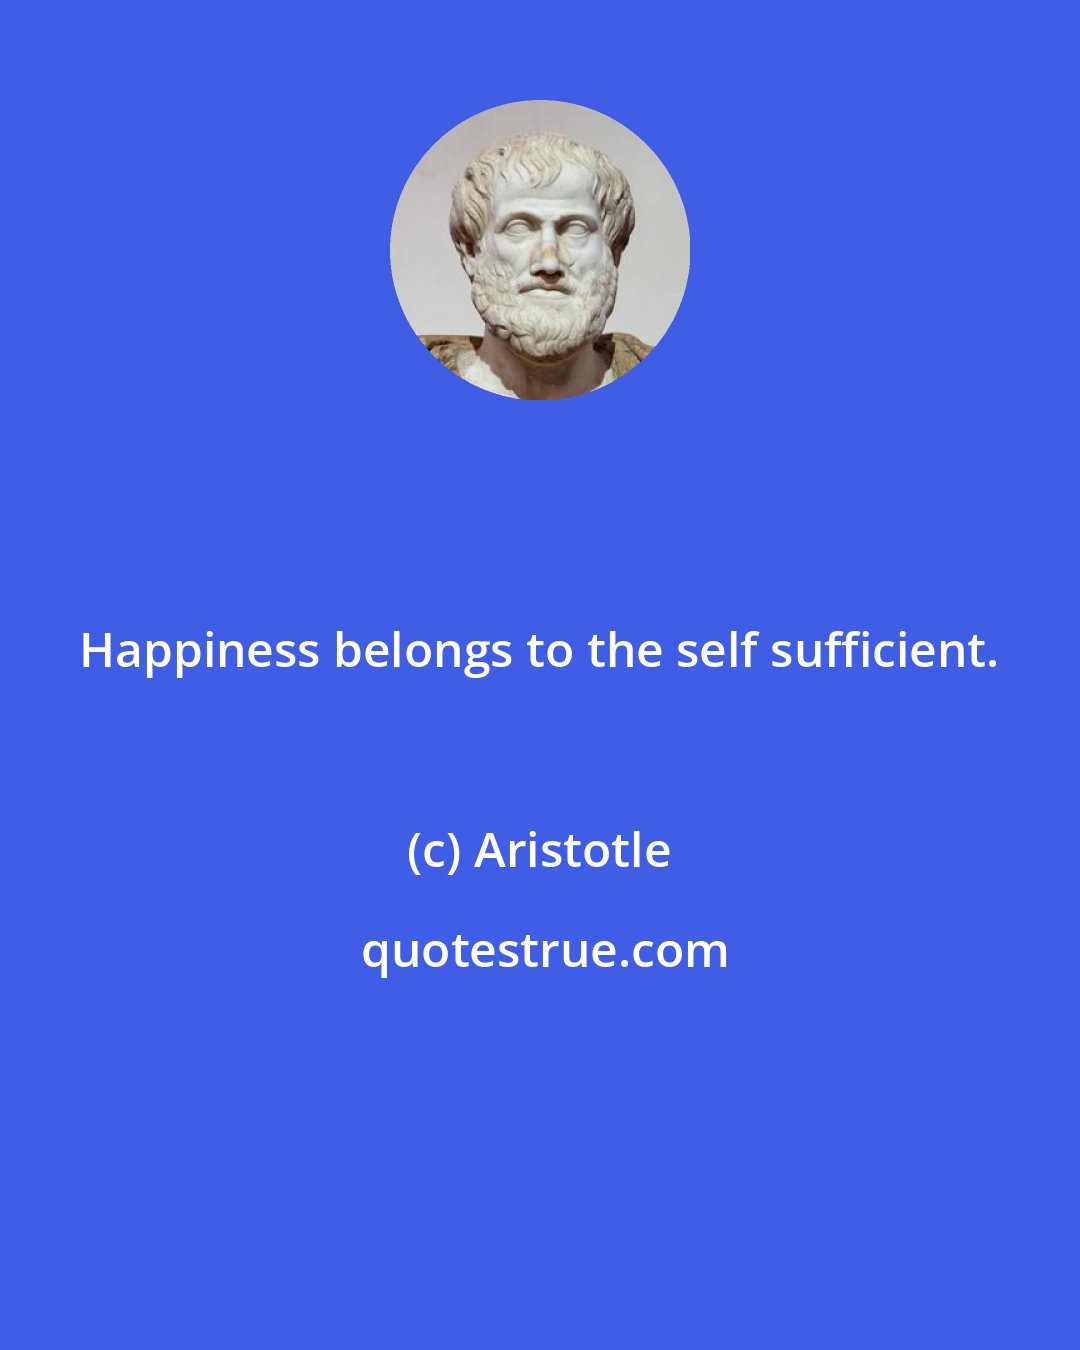 Aristotle: Happiness belongs to the self sufficient.